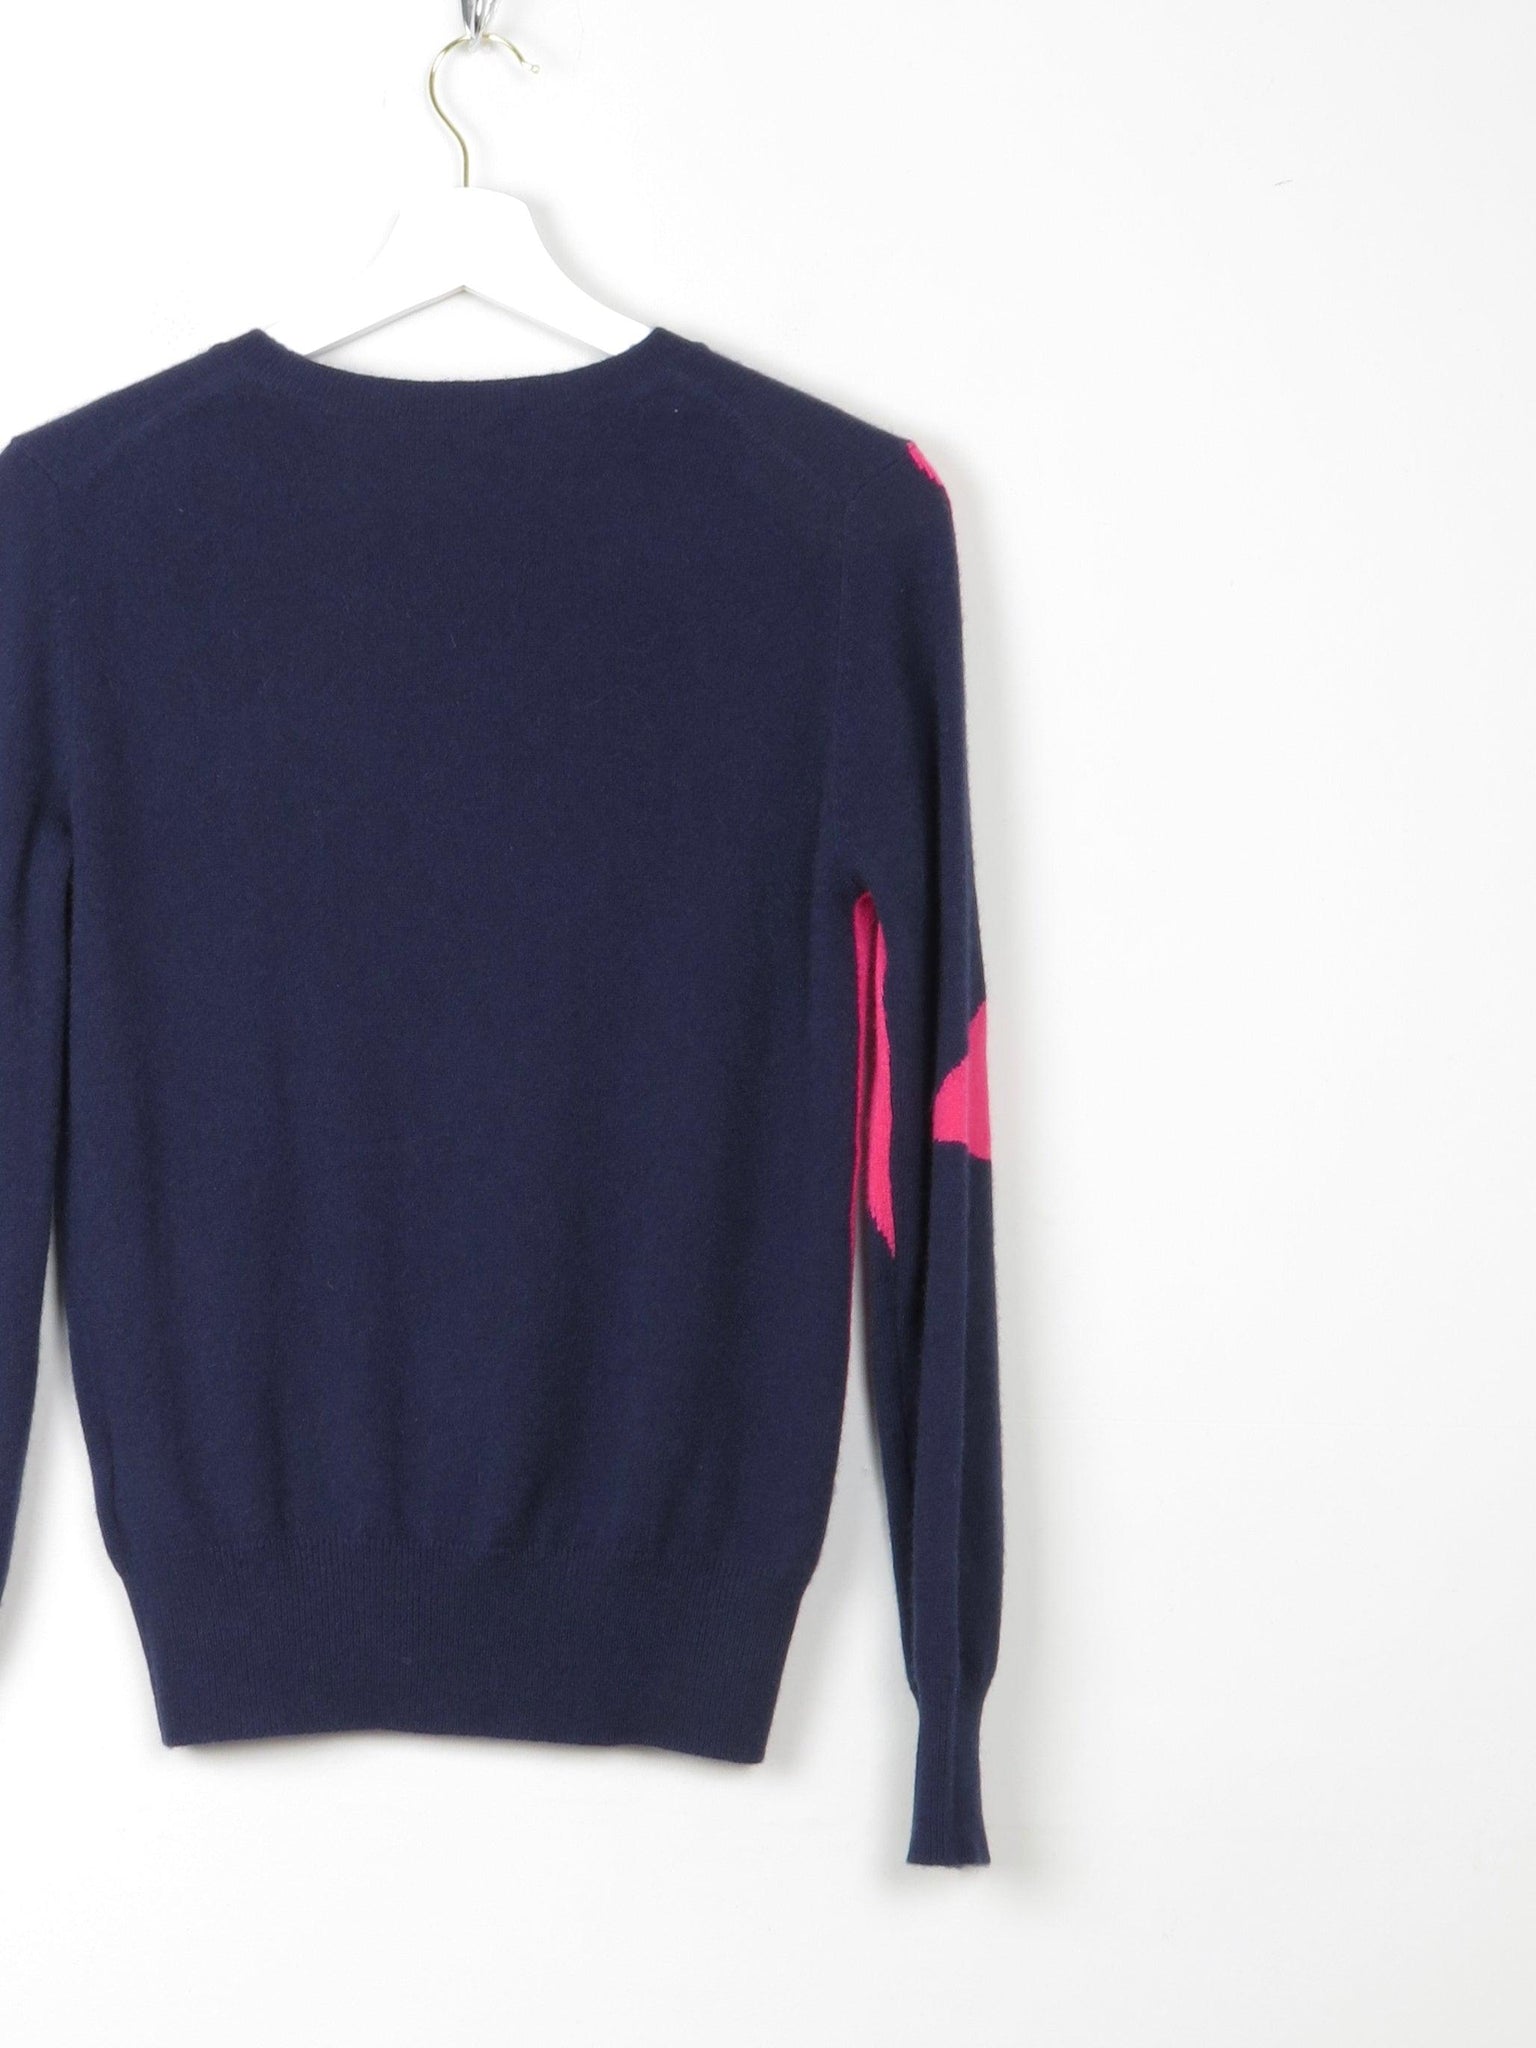 Women’s  Cashmere M&S Navy With Pink Star Jumper XS 6/8 - The Harlequin